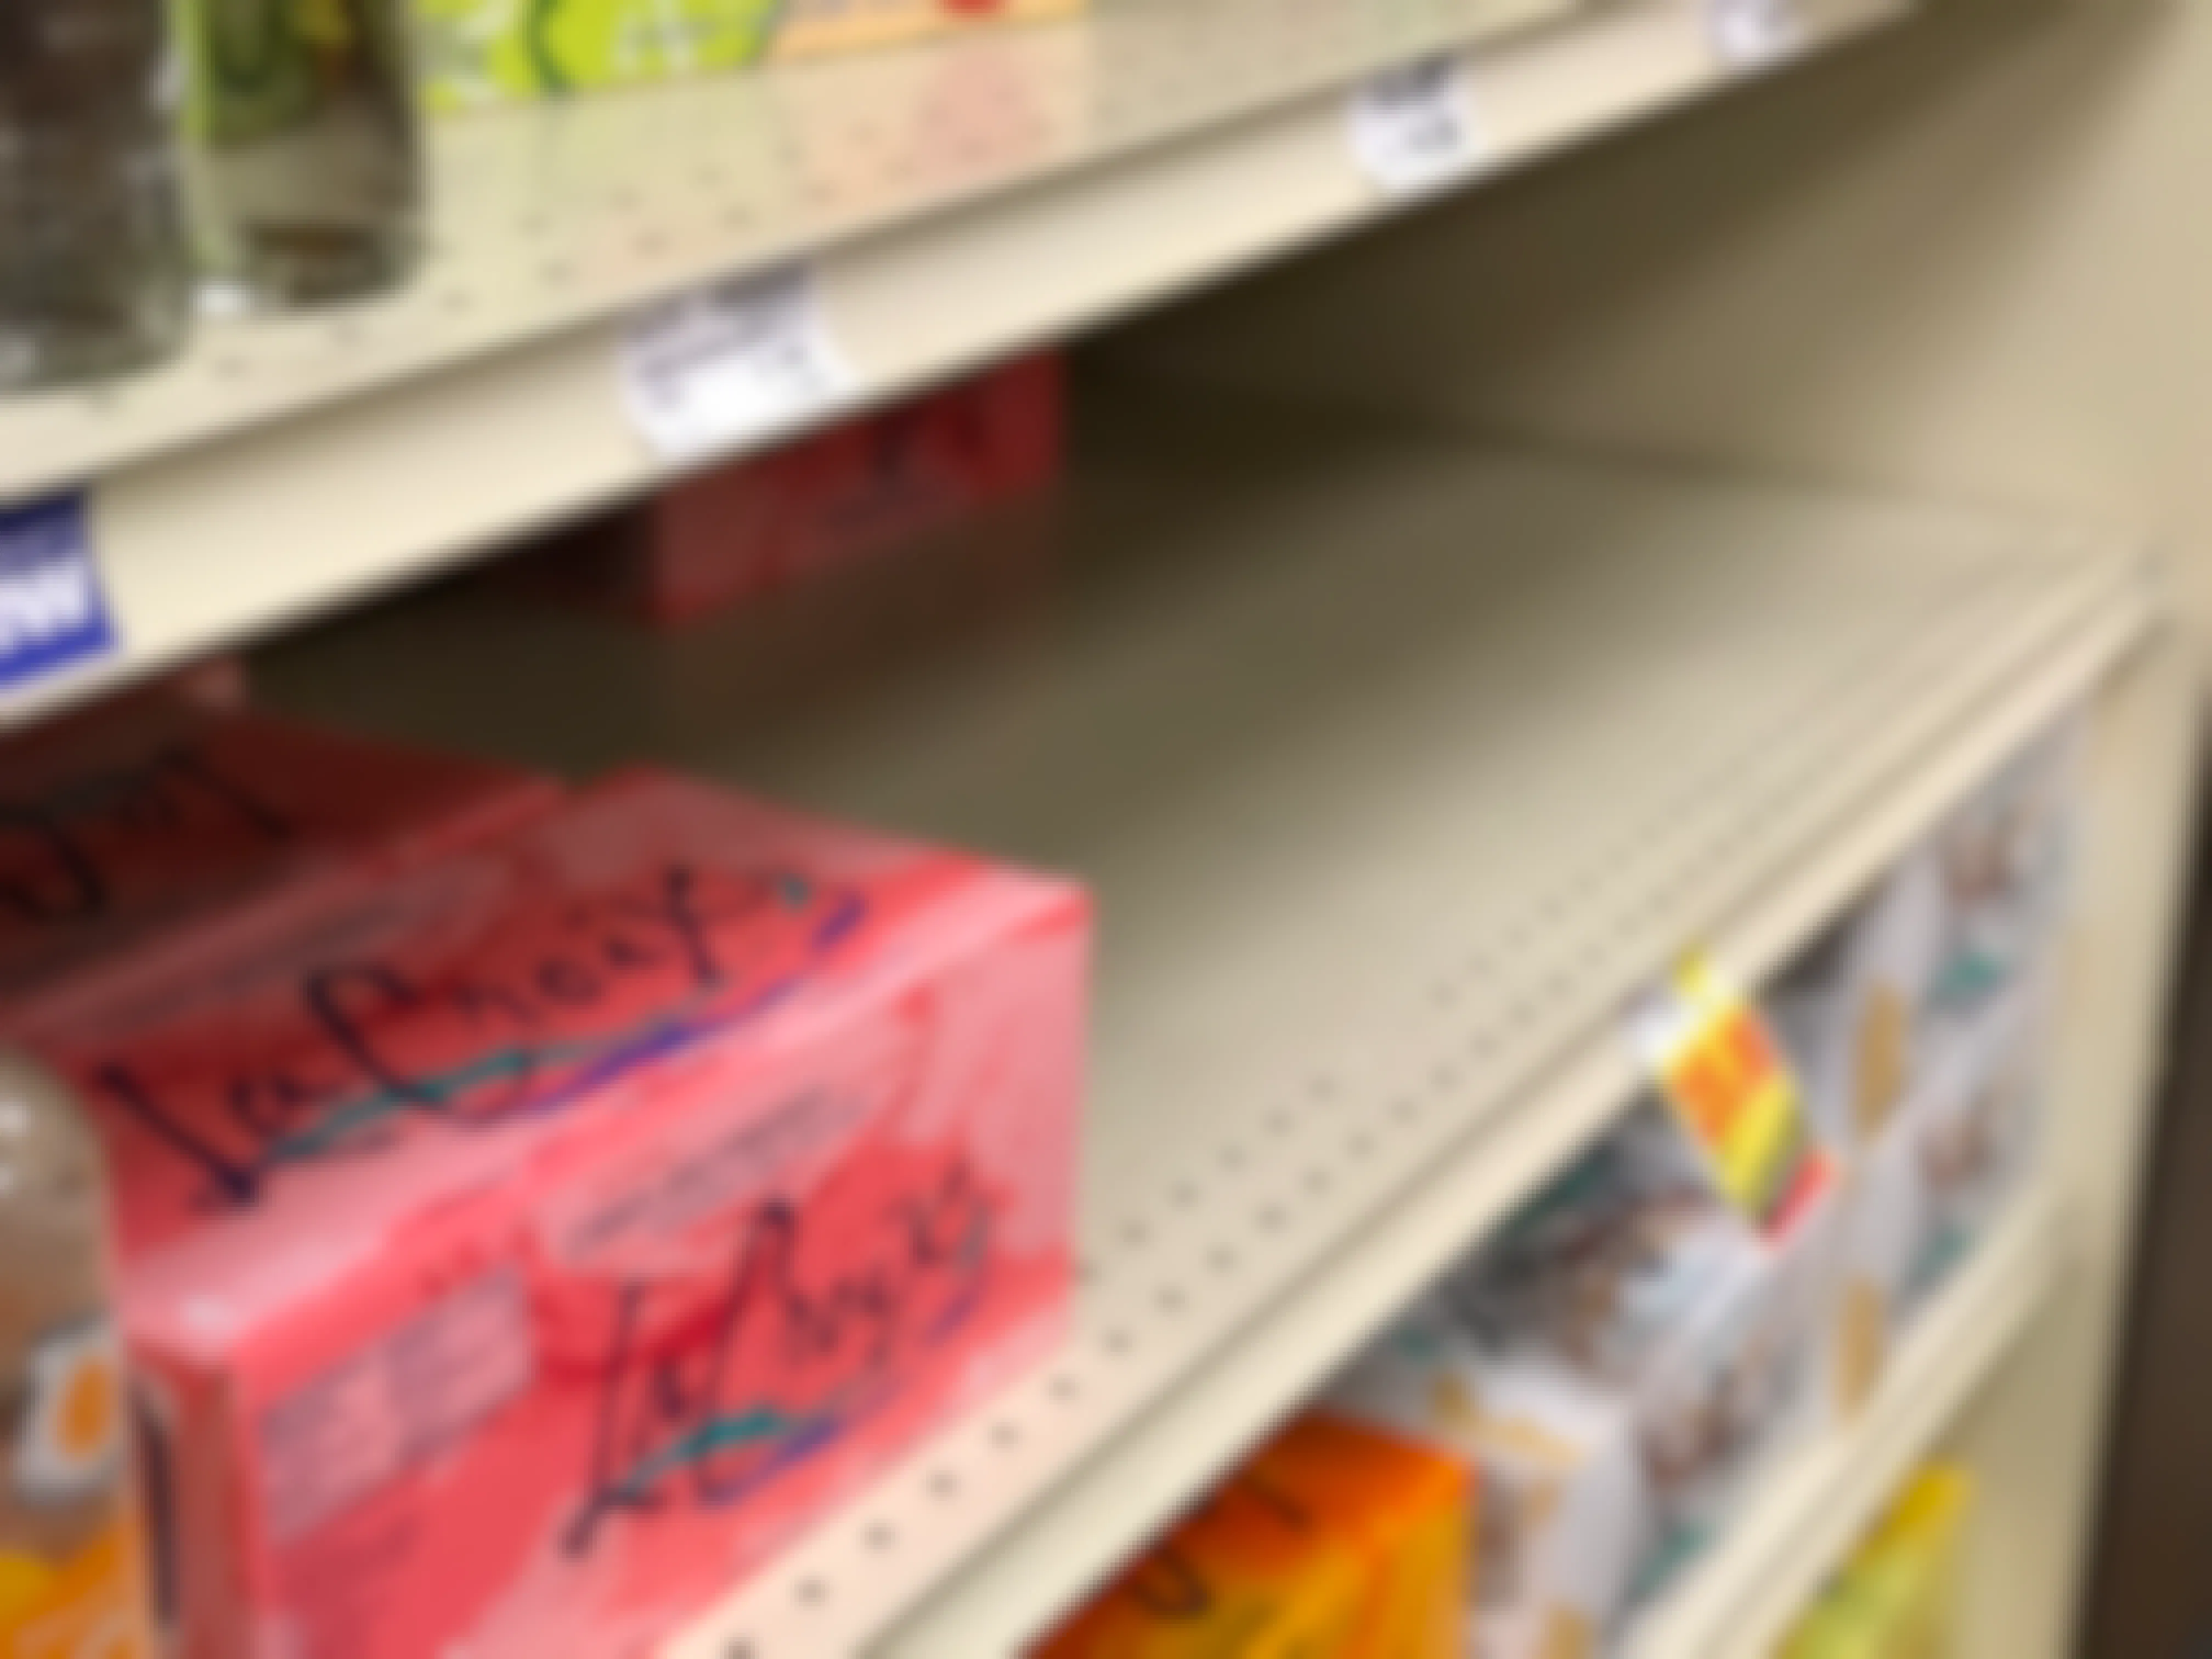 An almost empty shelf of La Croix sparkling water.